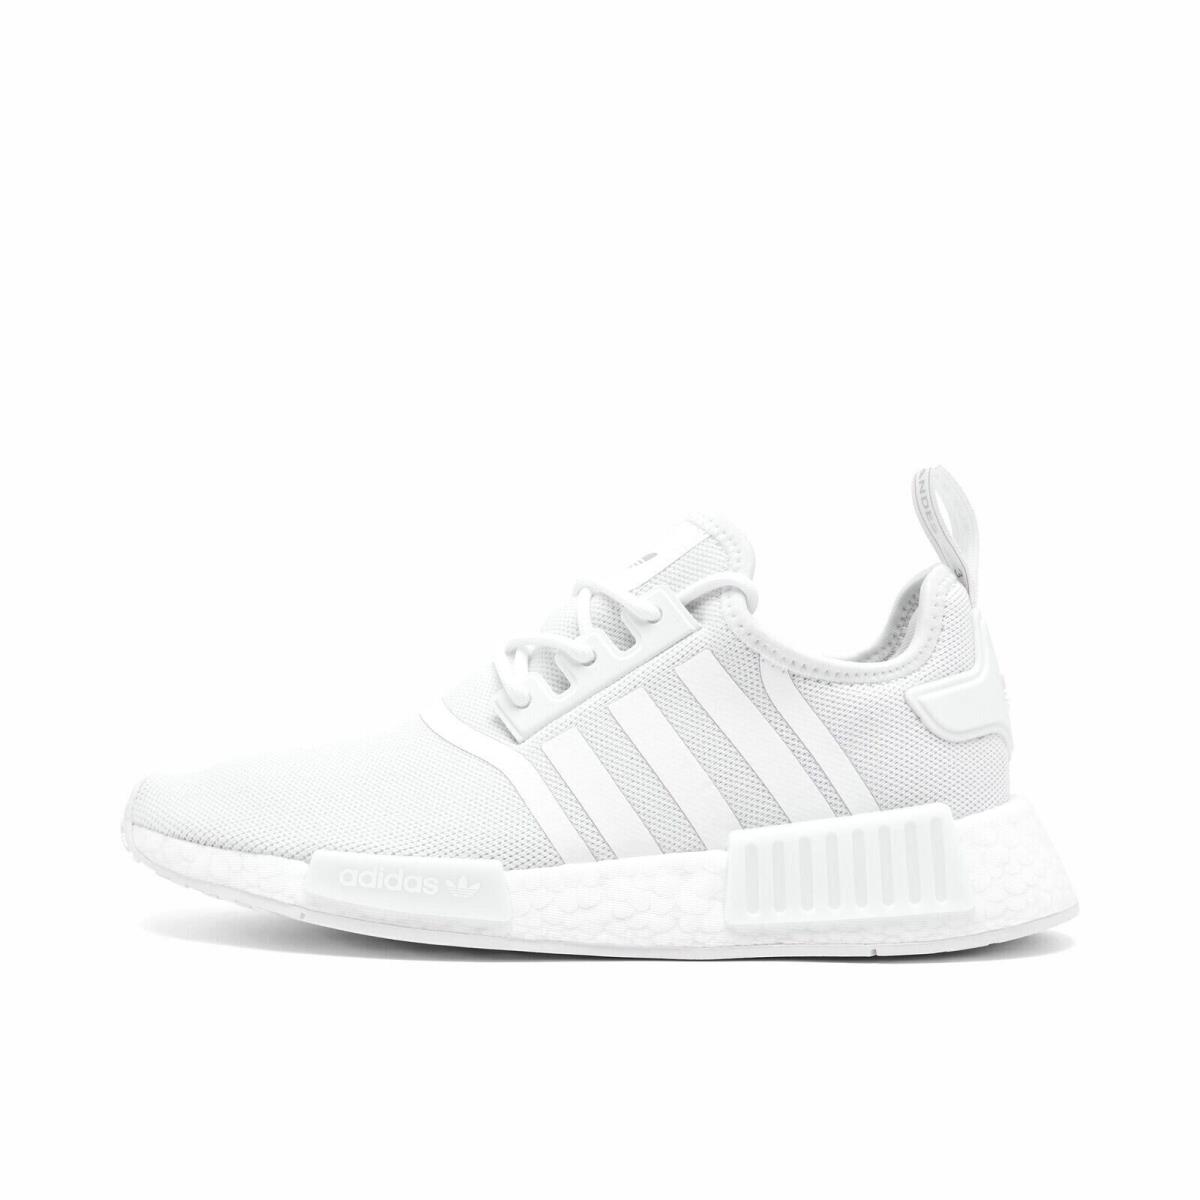 Adidas Originals Nmd R1 Sizes 6-11 Women`s Casual Shoes Multiple Colors White/White/White